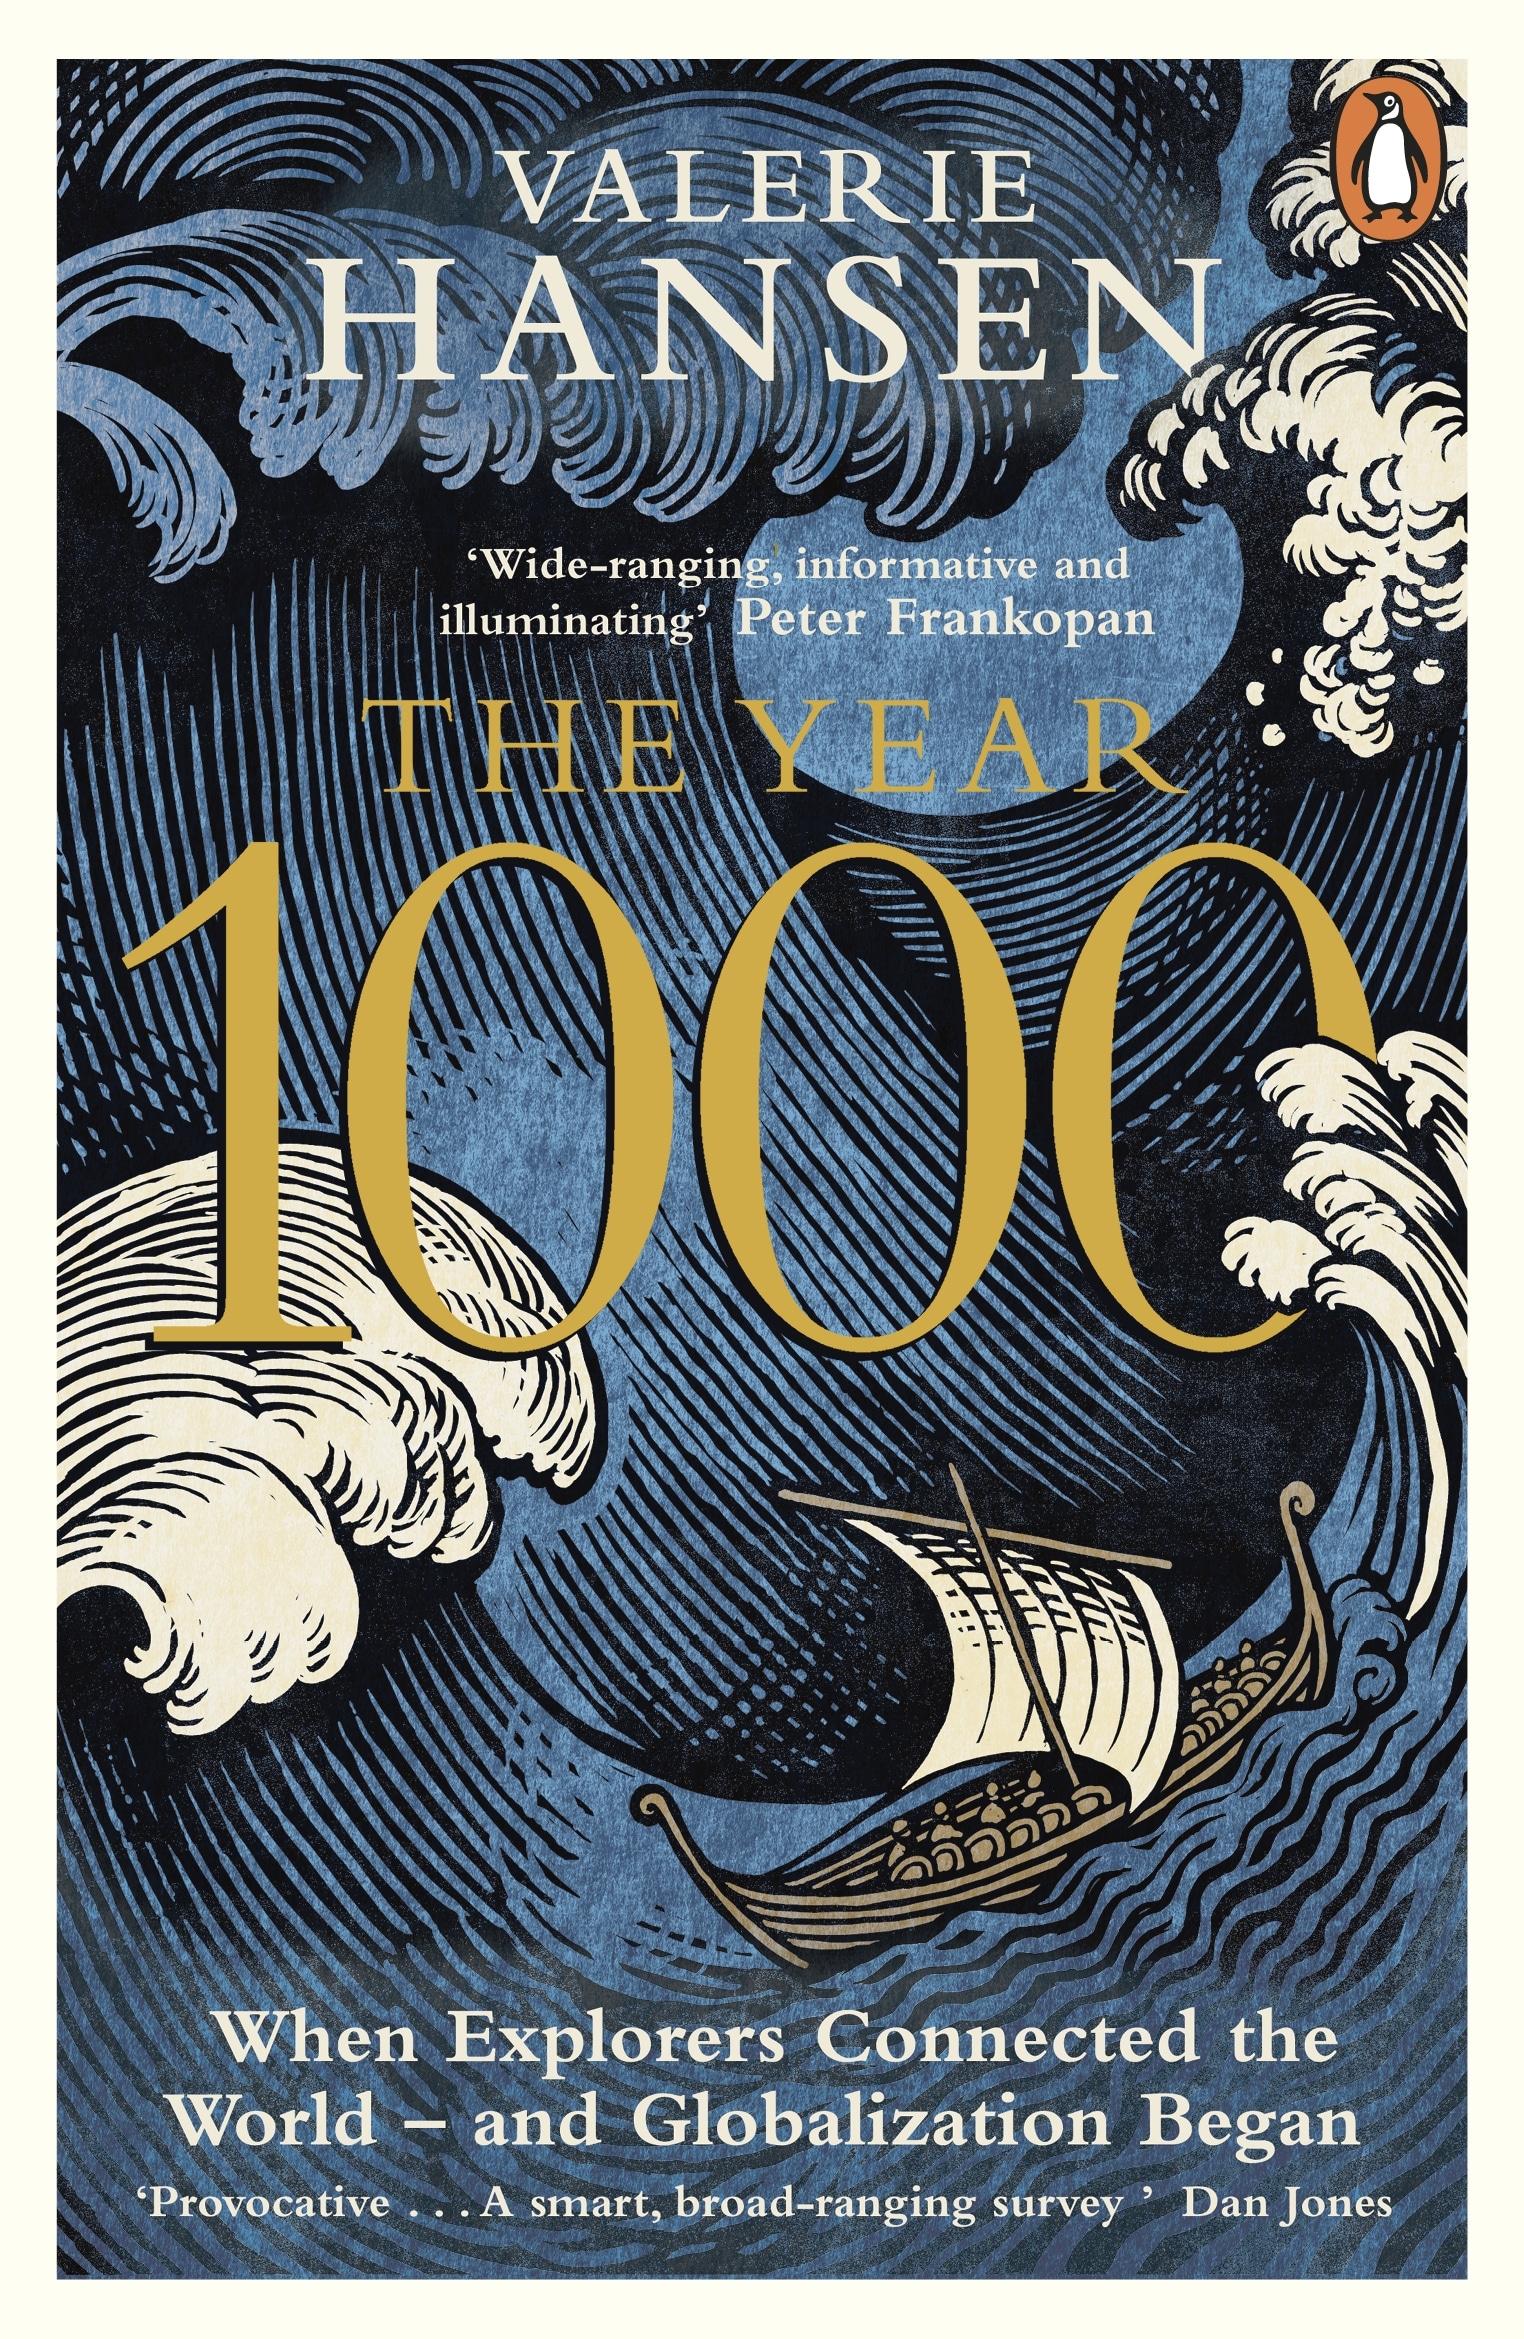 Book “The Year 1000” by Valerie Hansen — February 4, 2021